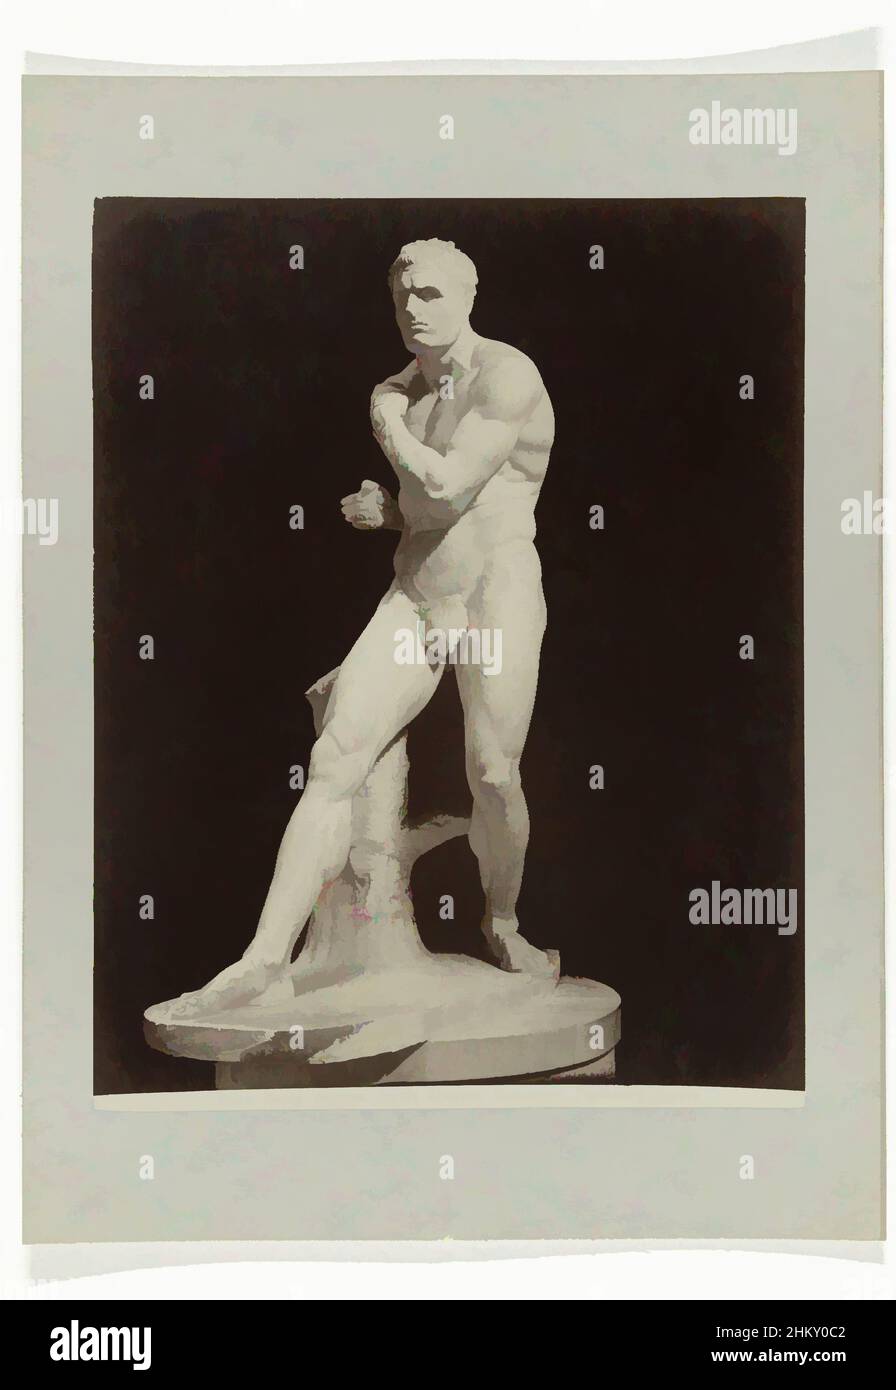 Art inspired by Sculpture of Damoxenos in fighting pose, N. 1212 Roma. Museo Vaticano. Cortile Ottagono, Damossene, Pugillatore. Canova, Rome, c. 1880 - c. 1904, paper, albumen print, height 255 mm × width 200 mmheight 327 mm × width 241 mm, Classic works modernized by Artotop with a splash of modernity. Shapes, color and value, eye-catching visual impact on art. Emotions through freedom of artworks in a contemporary way. A timeless message pursuing a wildly creative new direction. Artists turning to the digital medium and creating the Artotop NFT Stock Photo